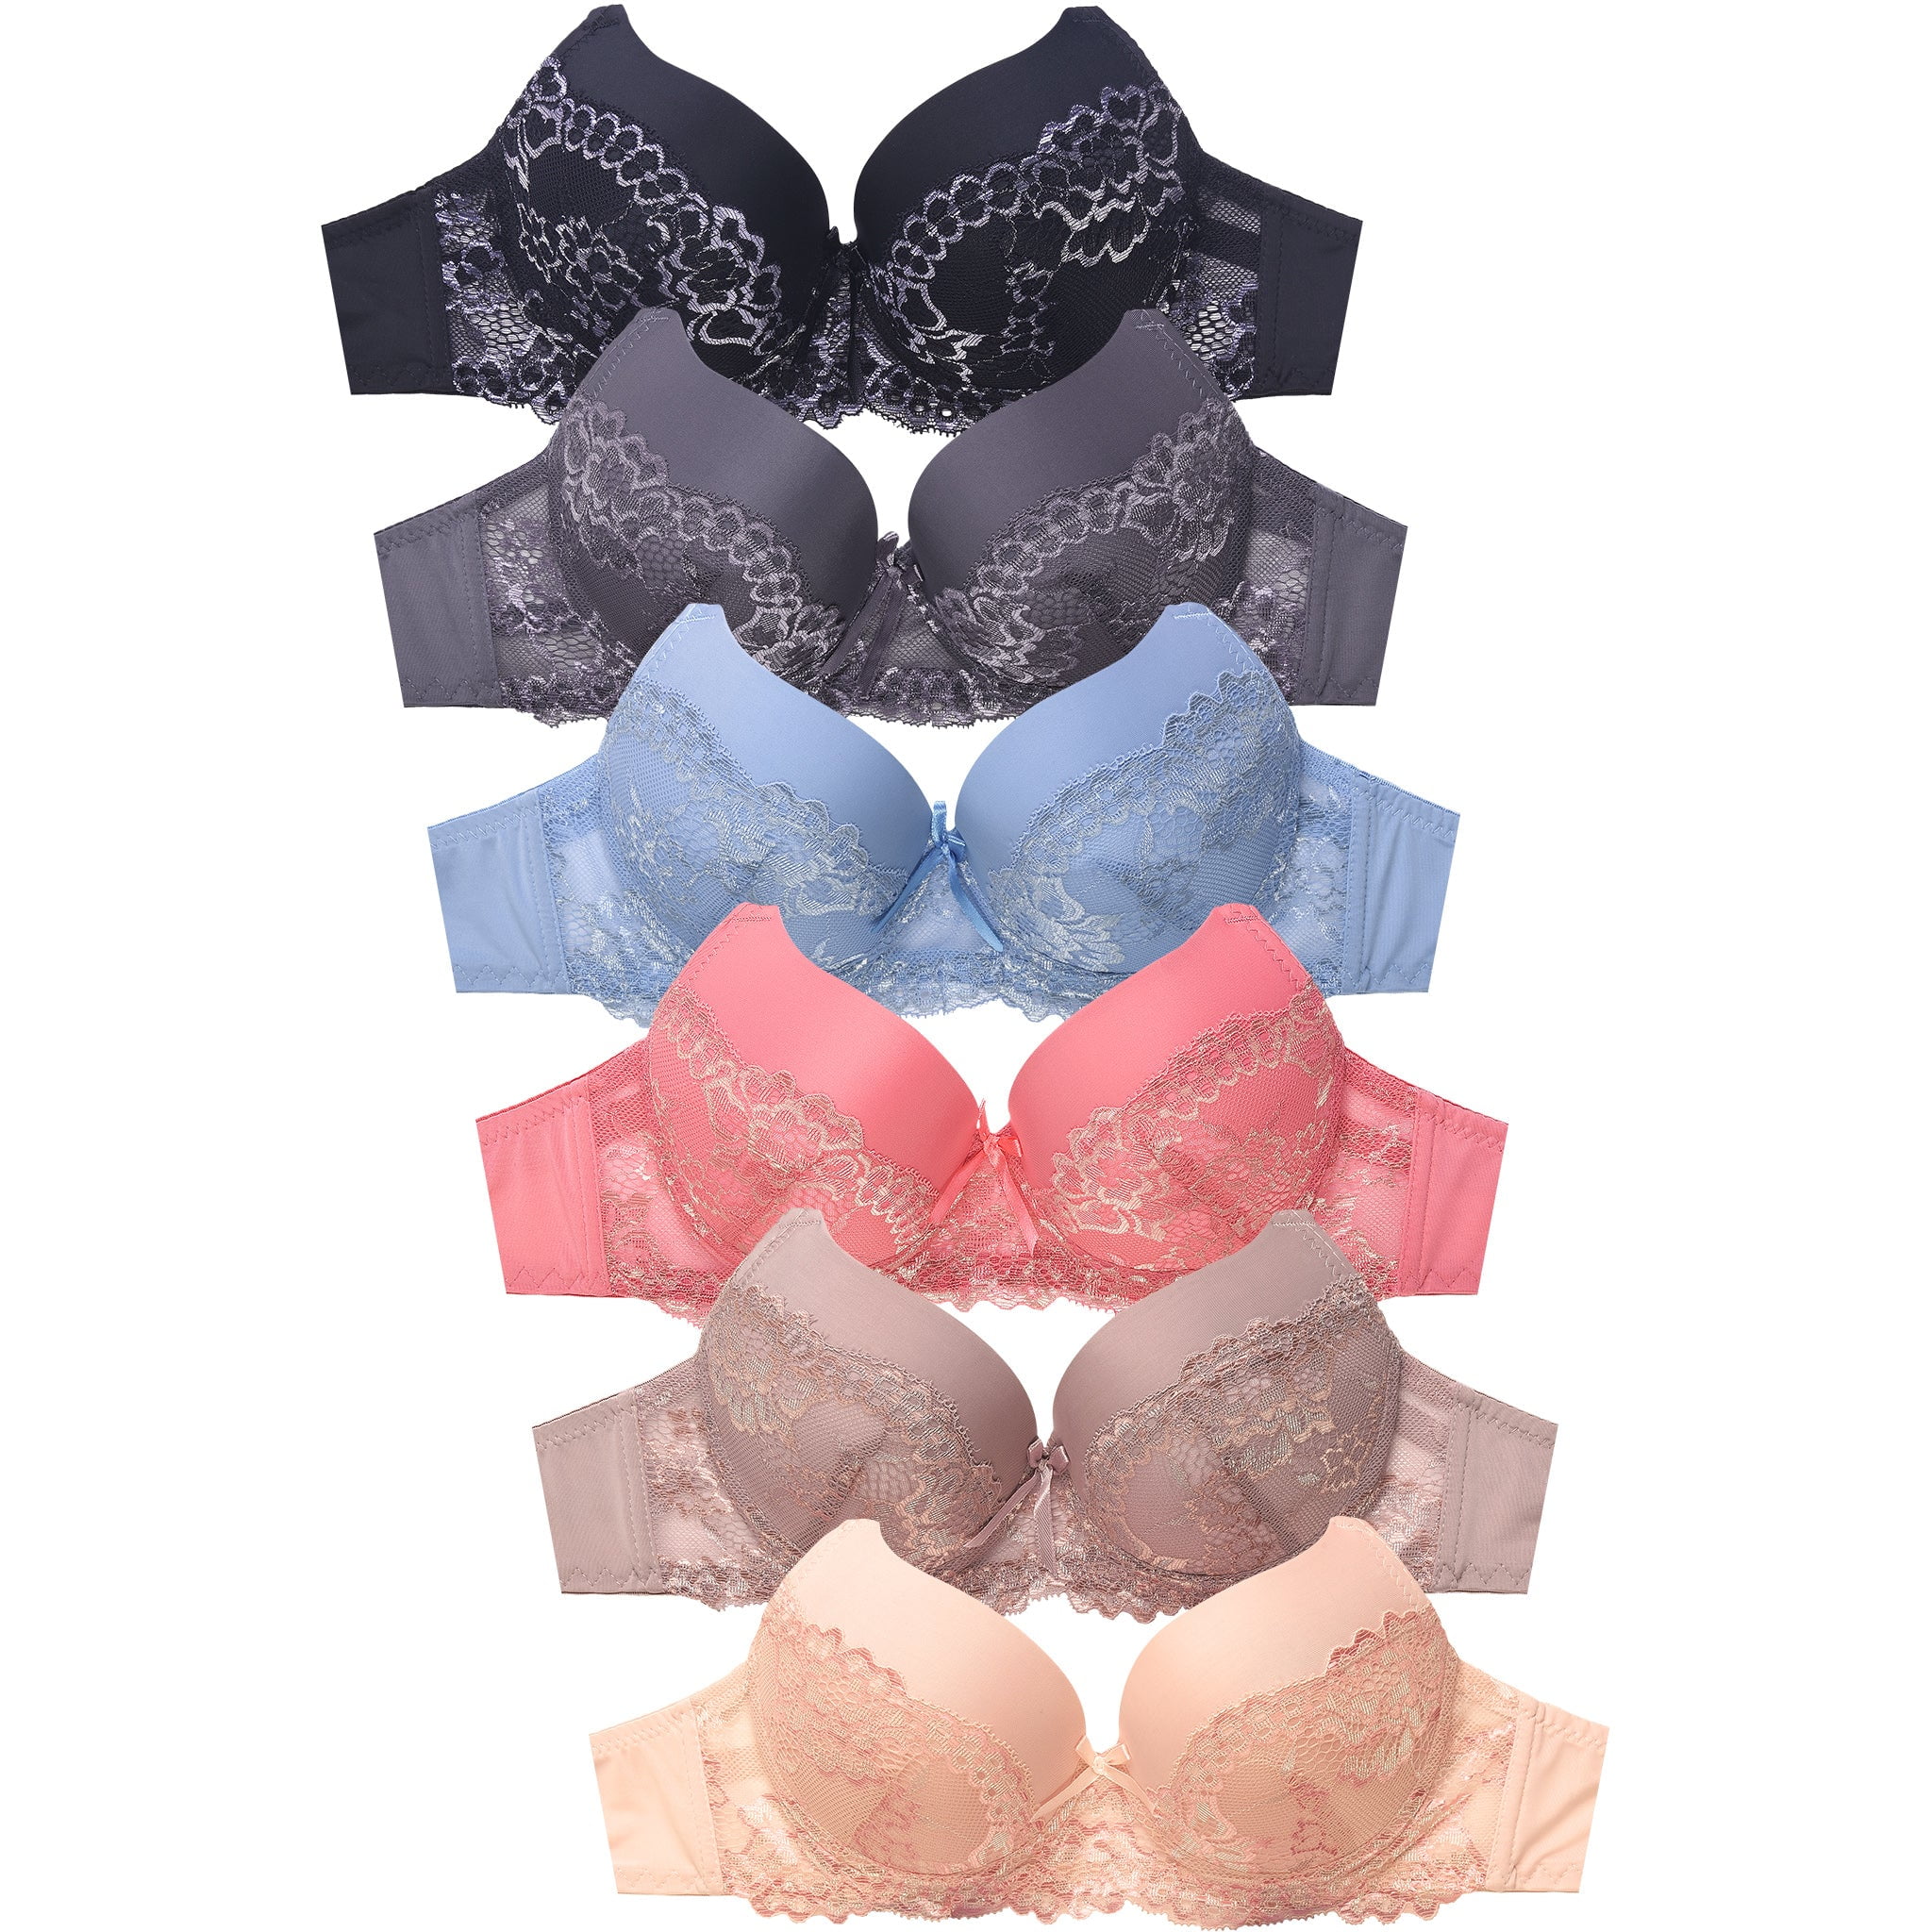 Mamia & Sofra IN-BR4311PLD-34D D Cup Full Coverage Bra - Size 34 - Pack of  6 